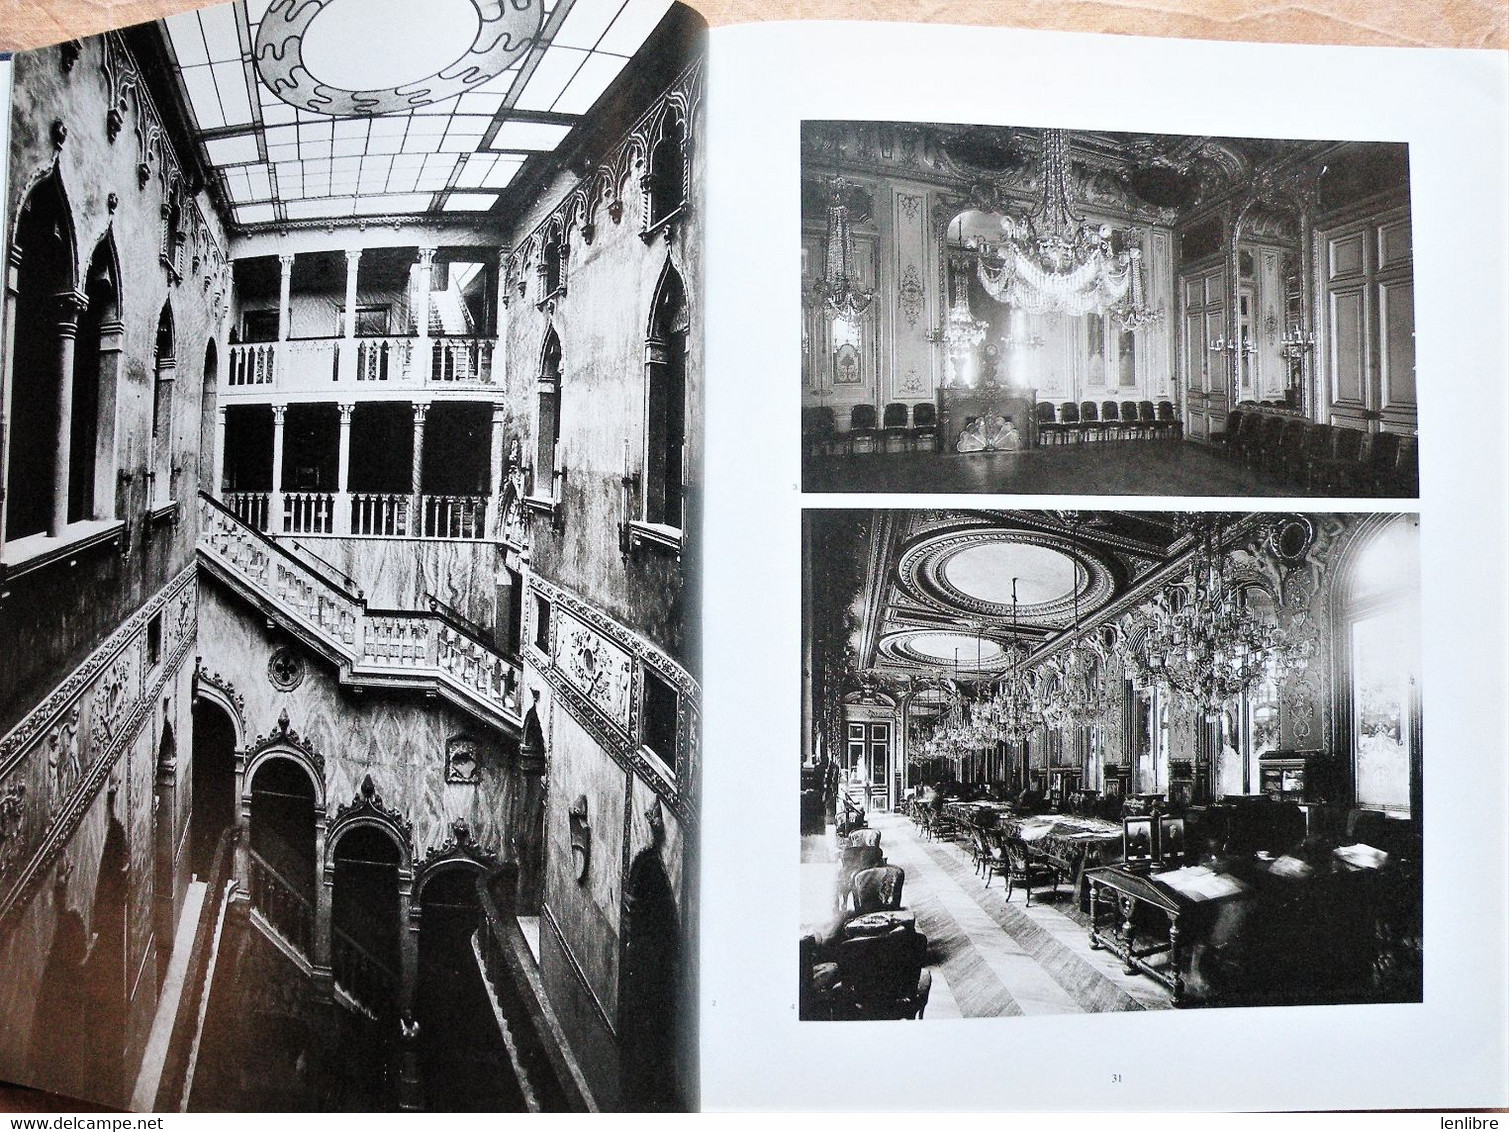 GRAND HOTEL, The Golden Age Of Palace Hotels, An Architectural And Social. 1984. - Cultural